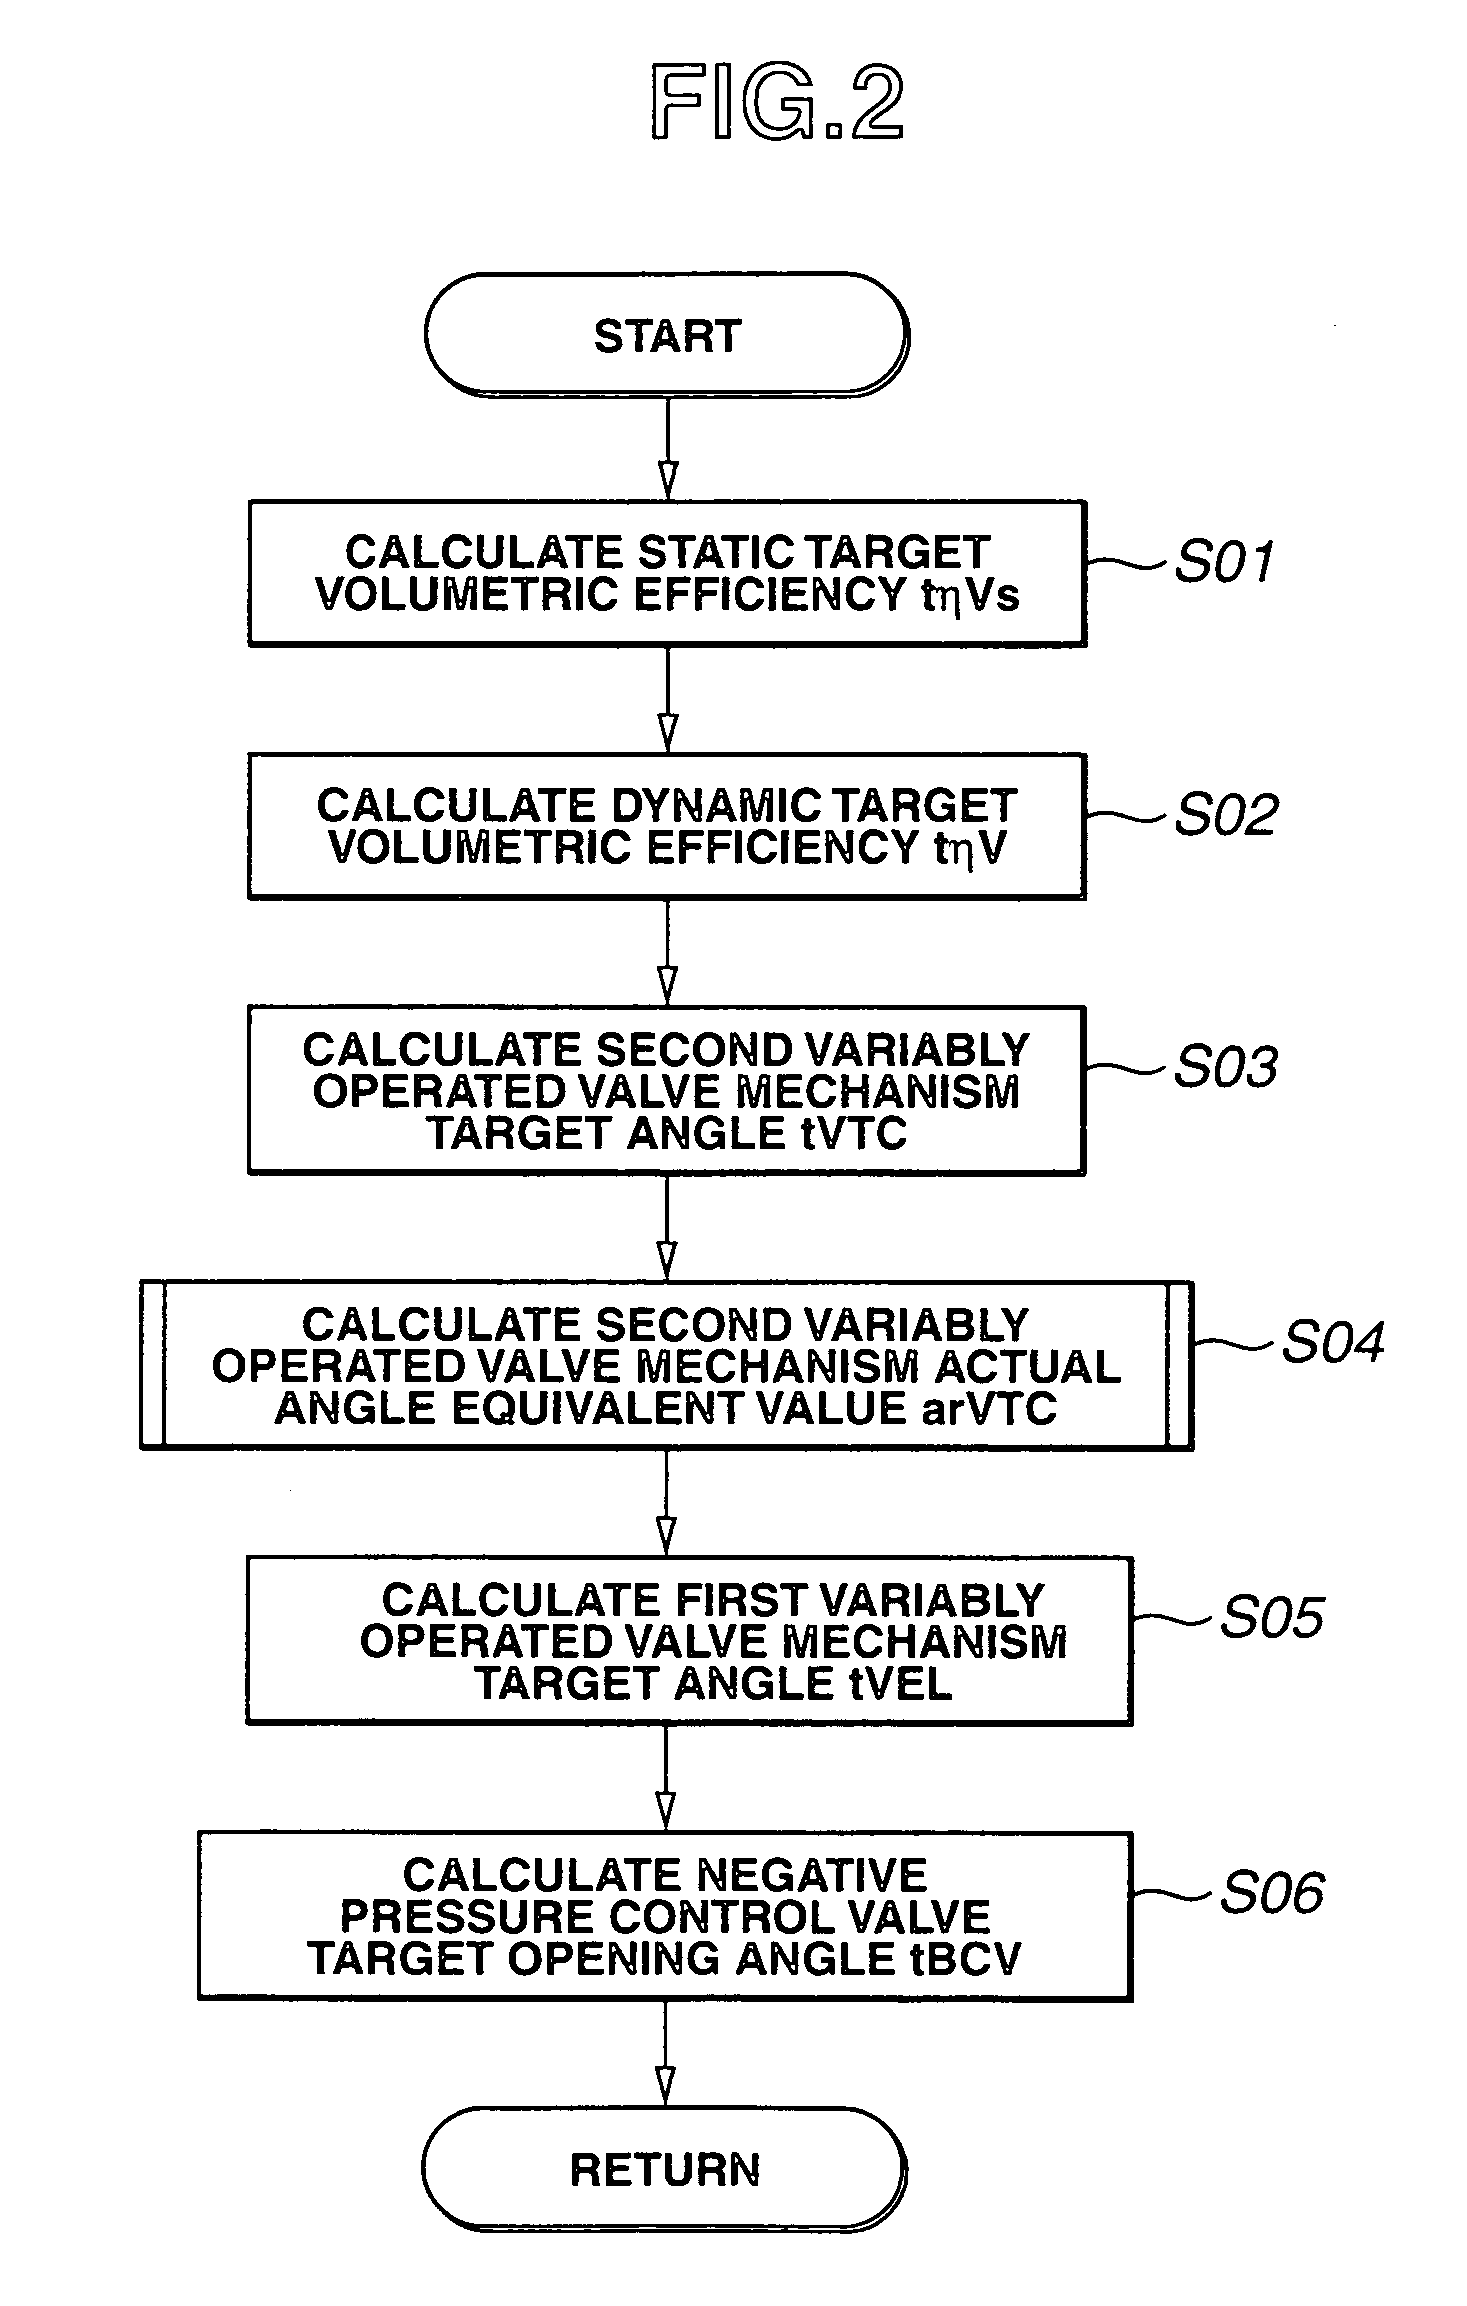 Intake air control apparatus and method for internal combustion engine